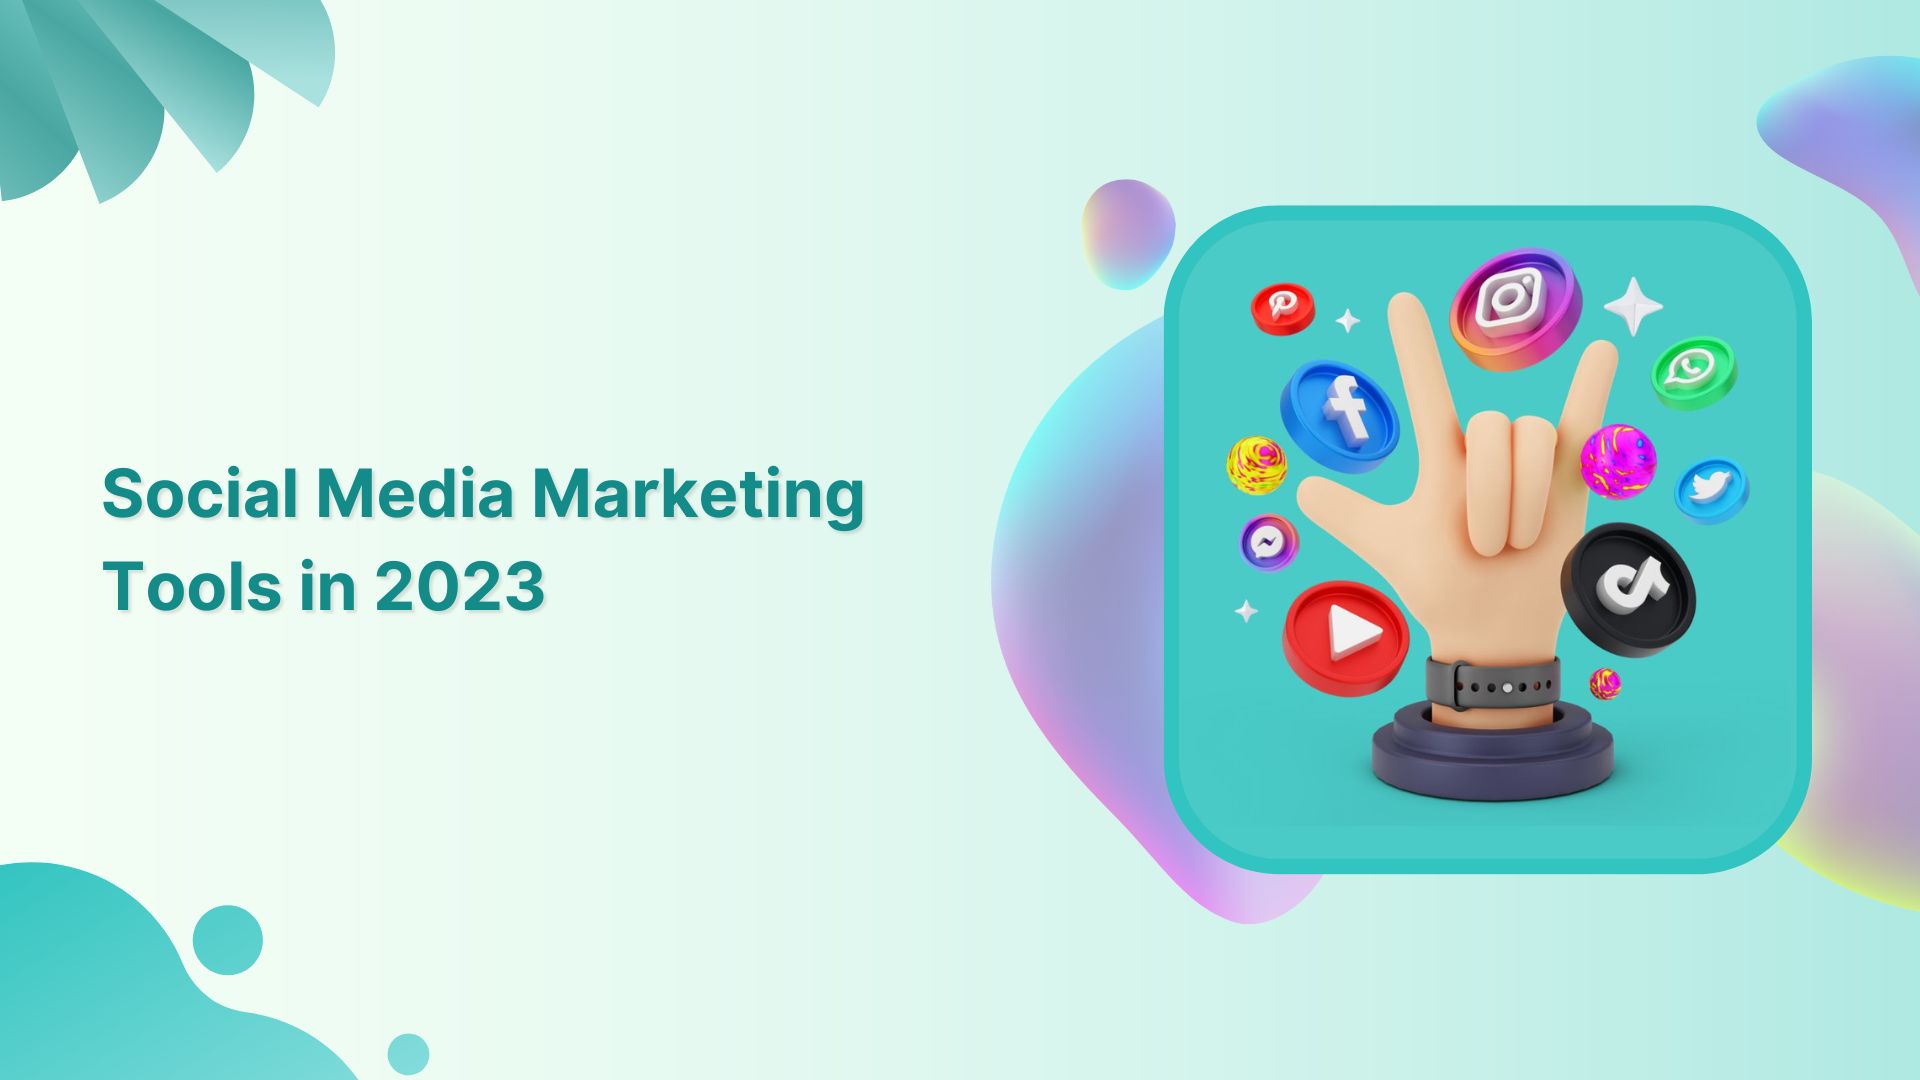 15+ Best Social Media Marketing Tools to Try in 2023